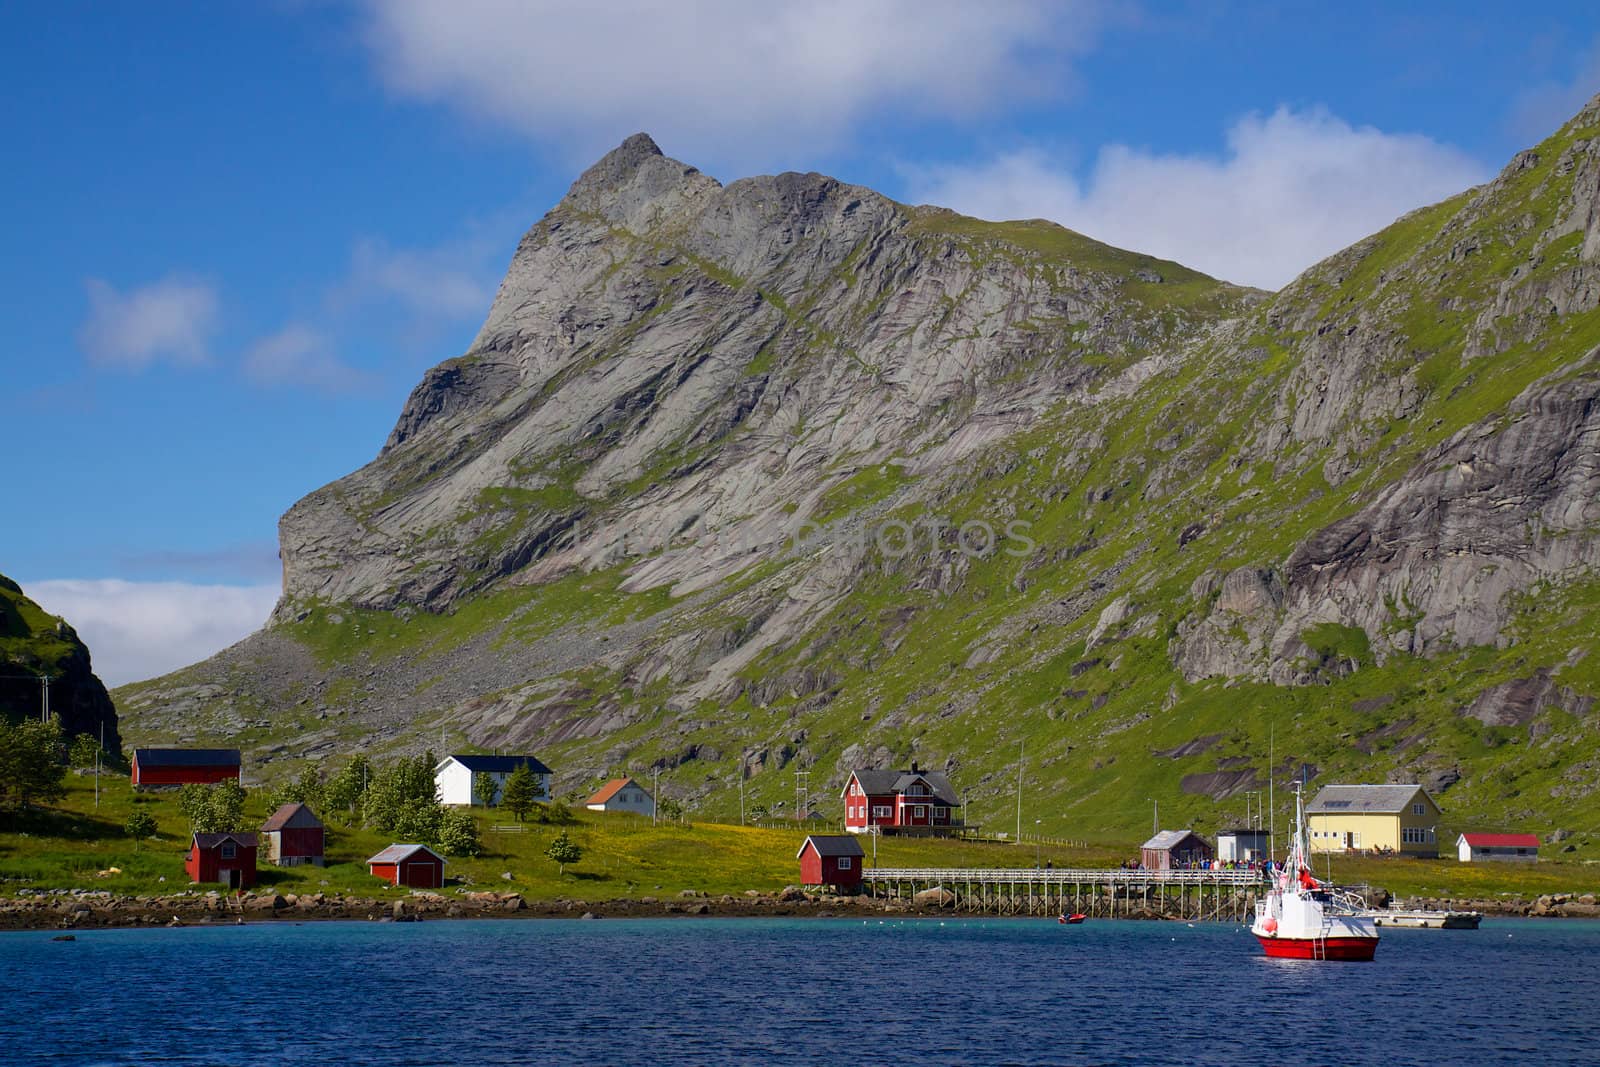 Picturesque village by the fjord on Lofoten islands in Norway